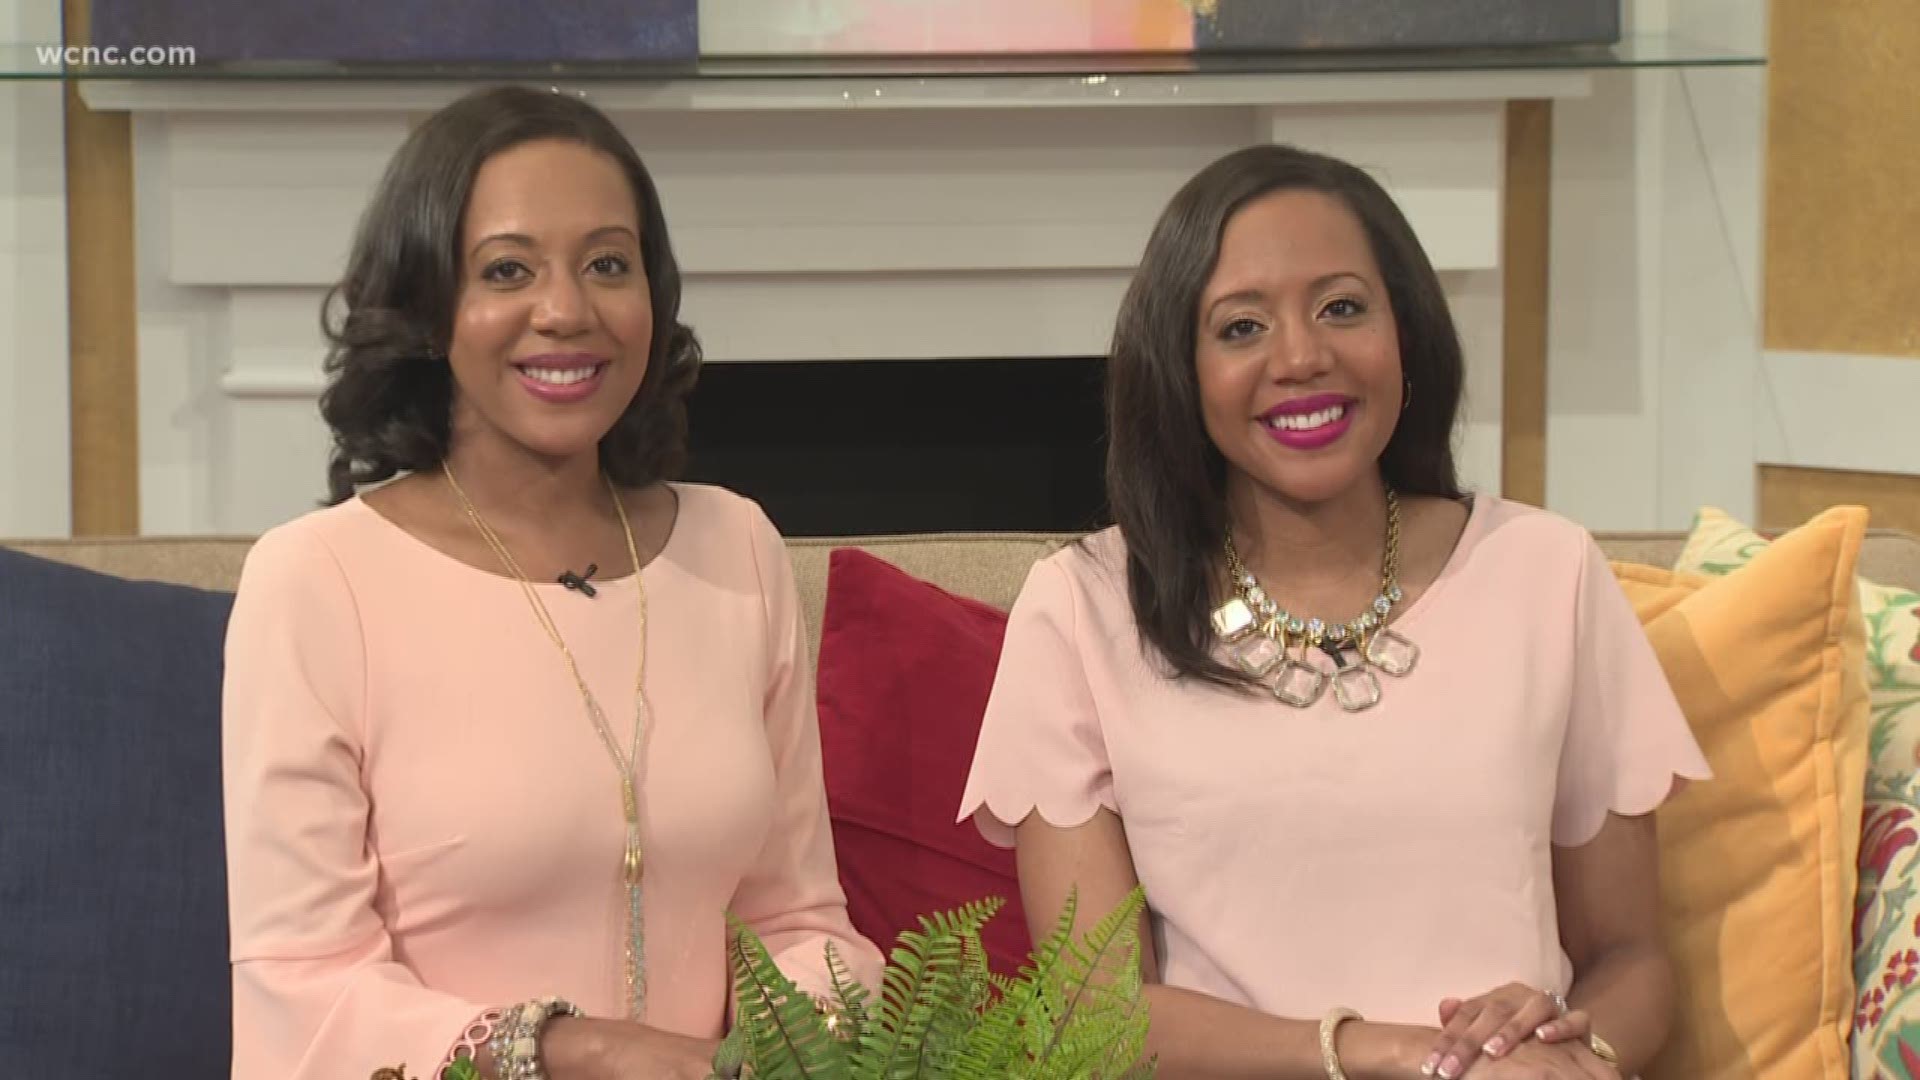 Meet the twin sisters who can help you get the smile you?ve dreamed of